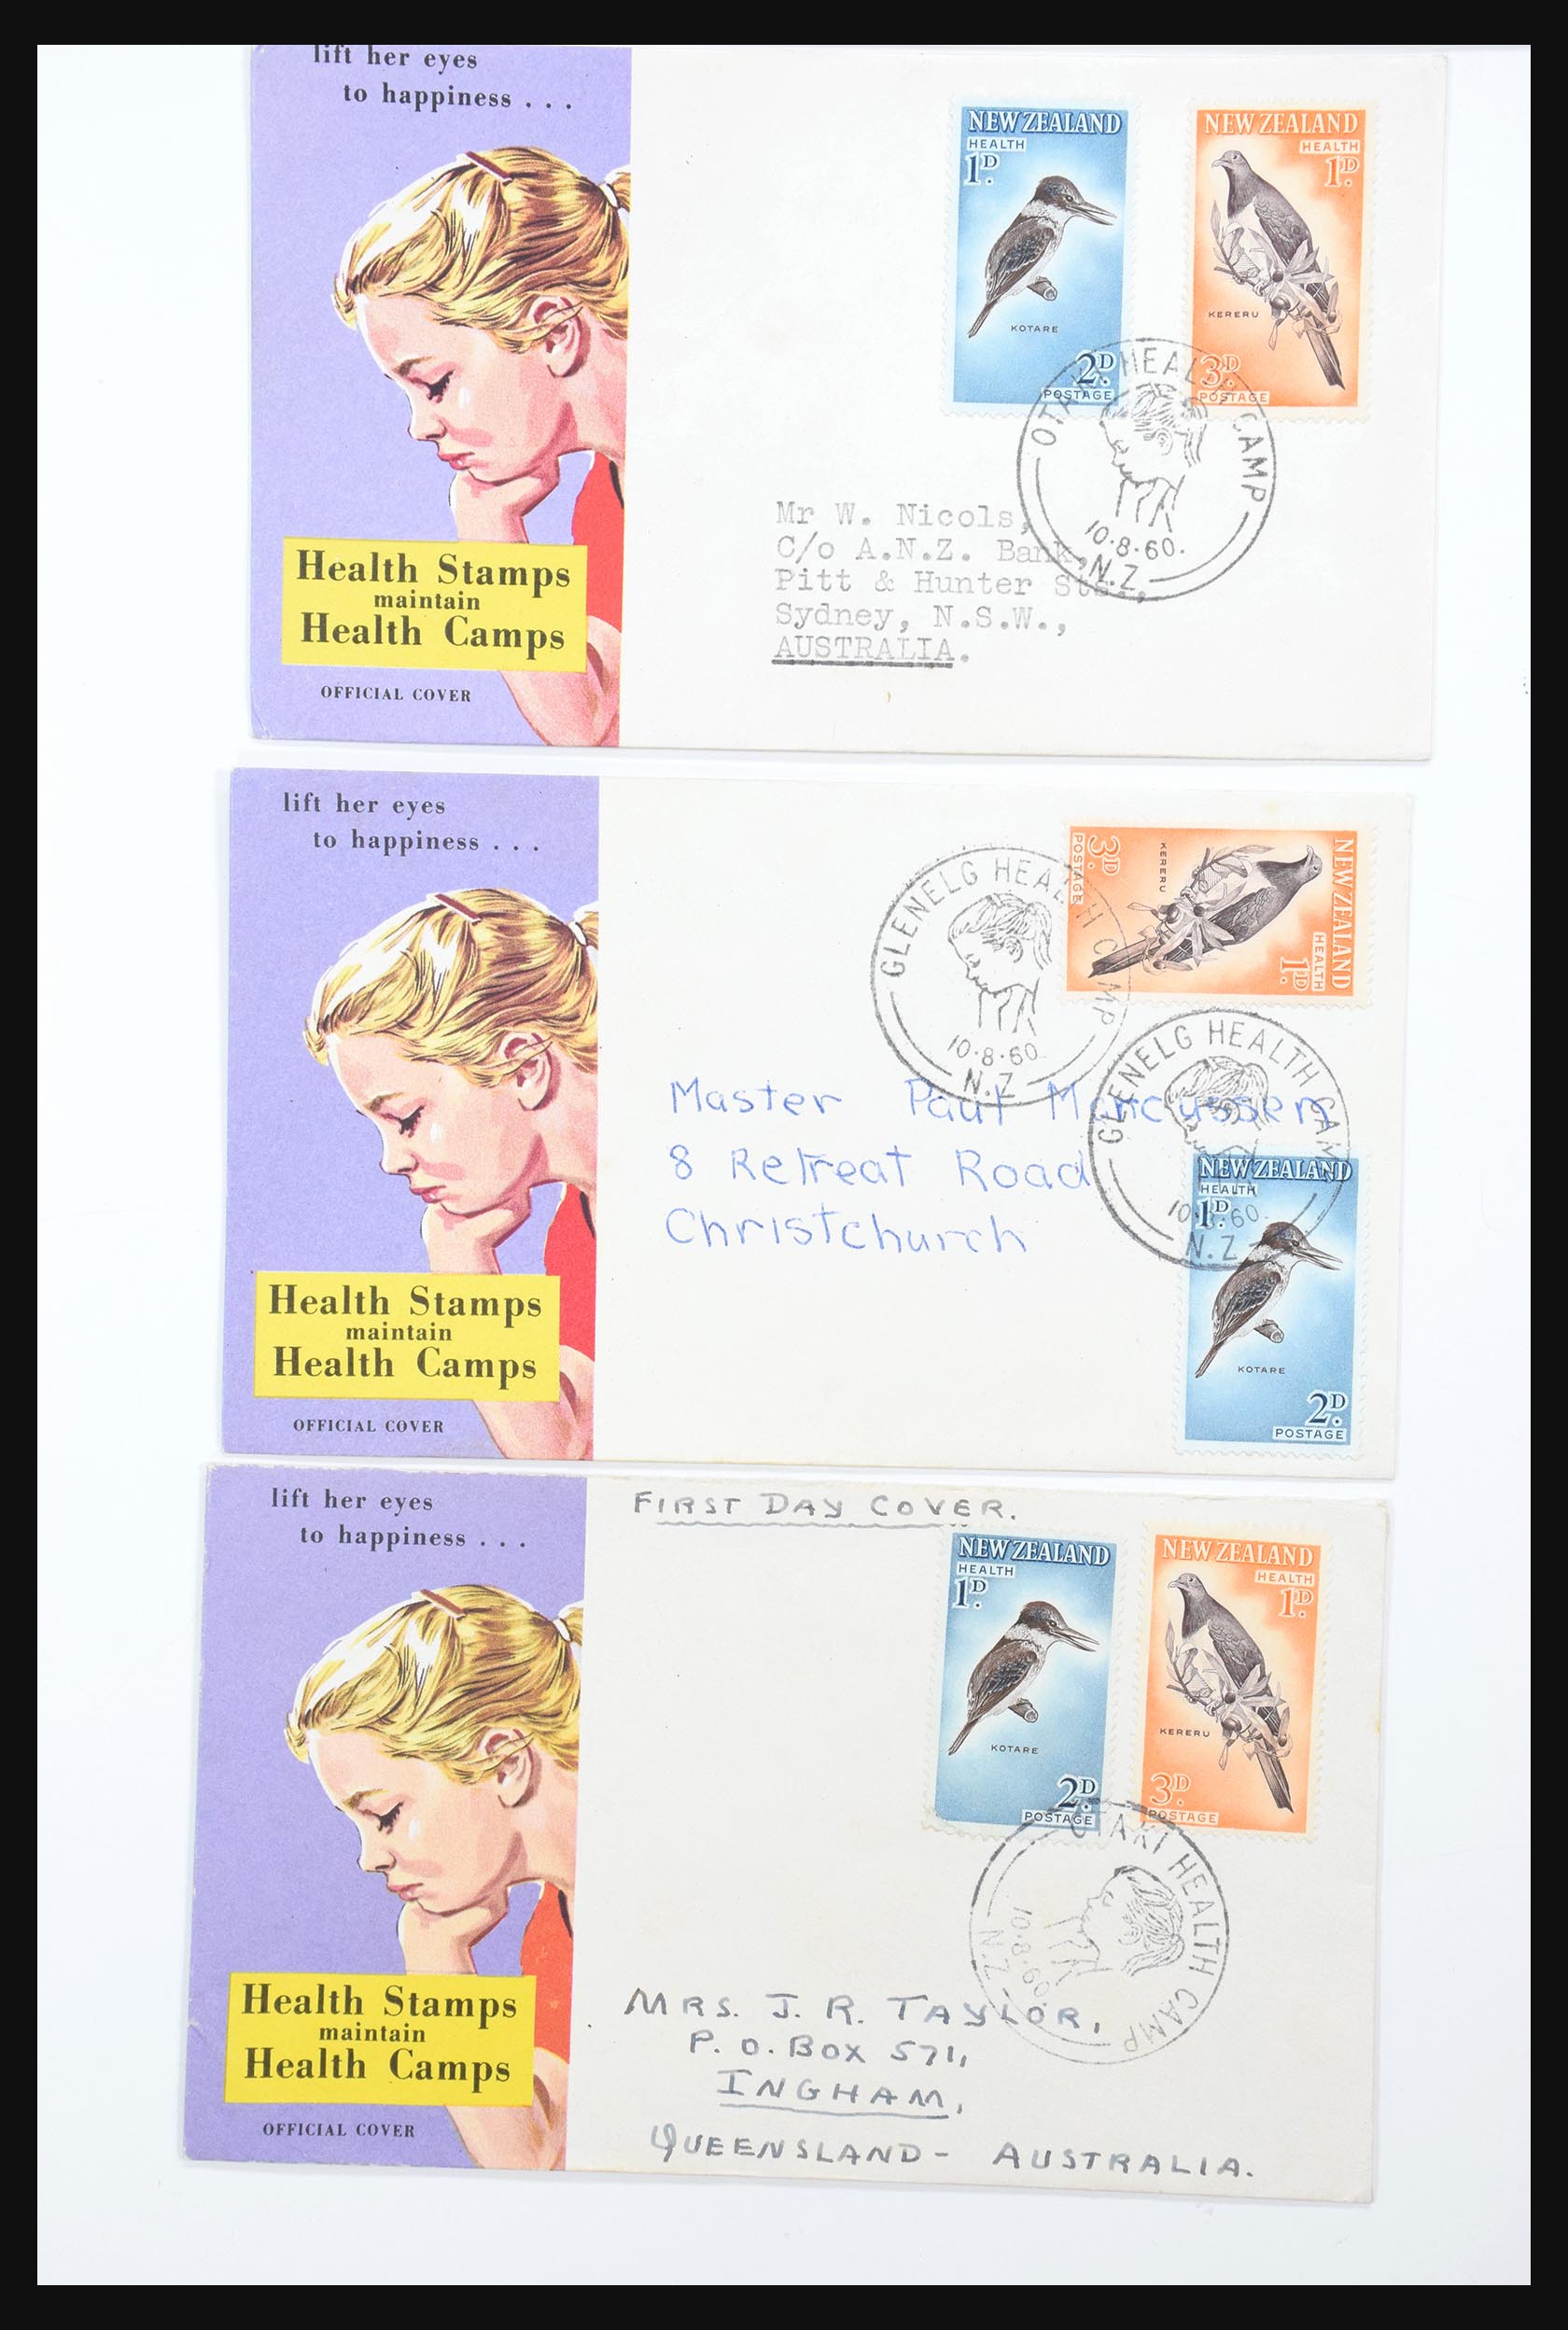 30821 010 - 30821 New Zealand FDC's 1960-1971.